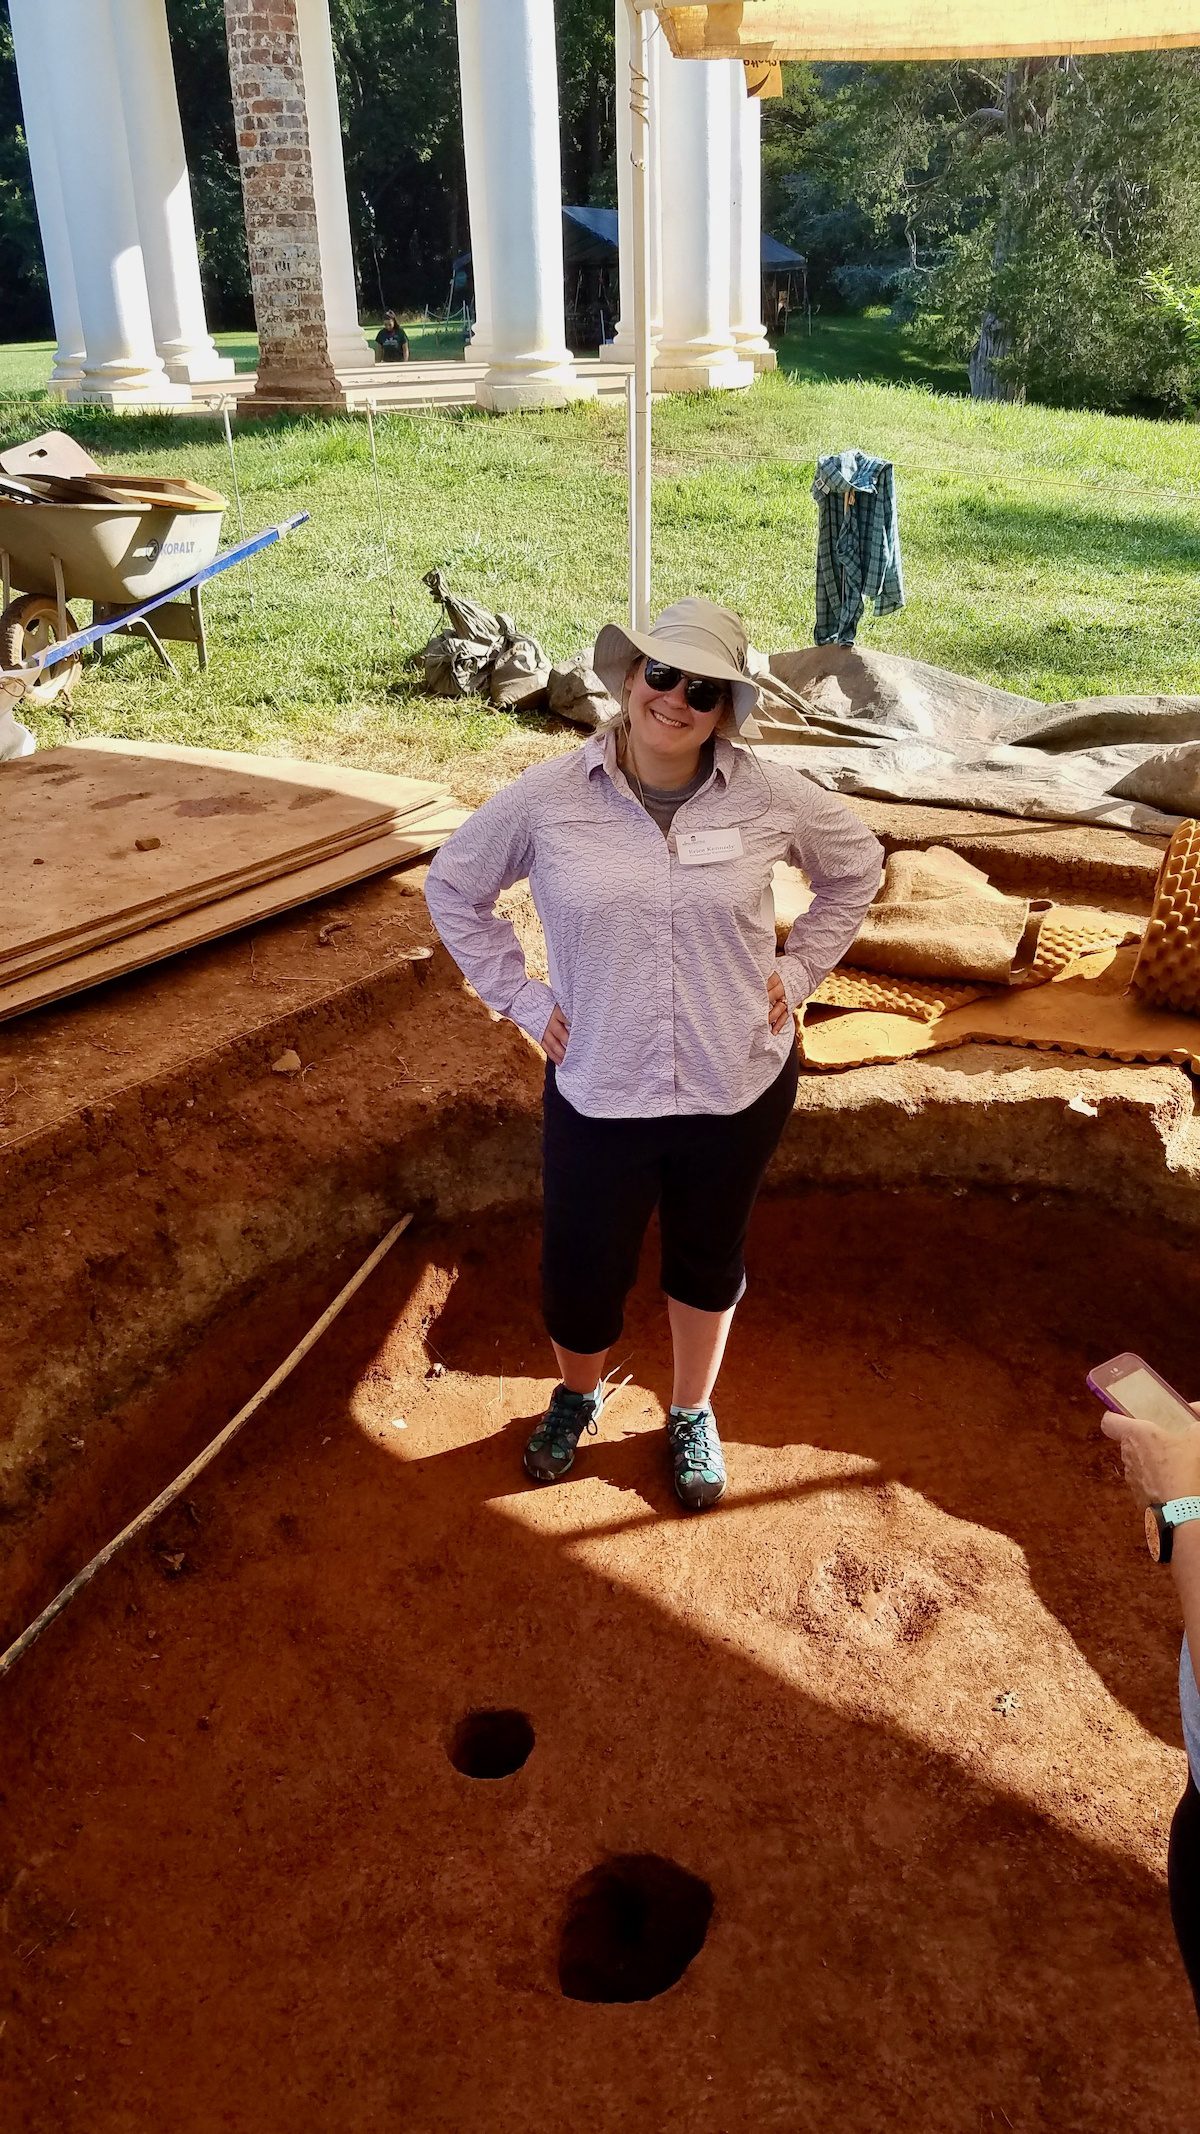 Erica at the excavation program at James Madison's Montpelier.